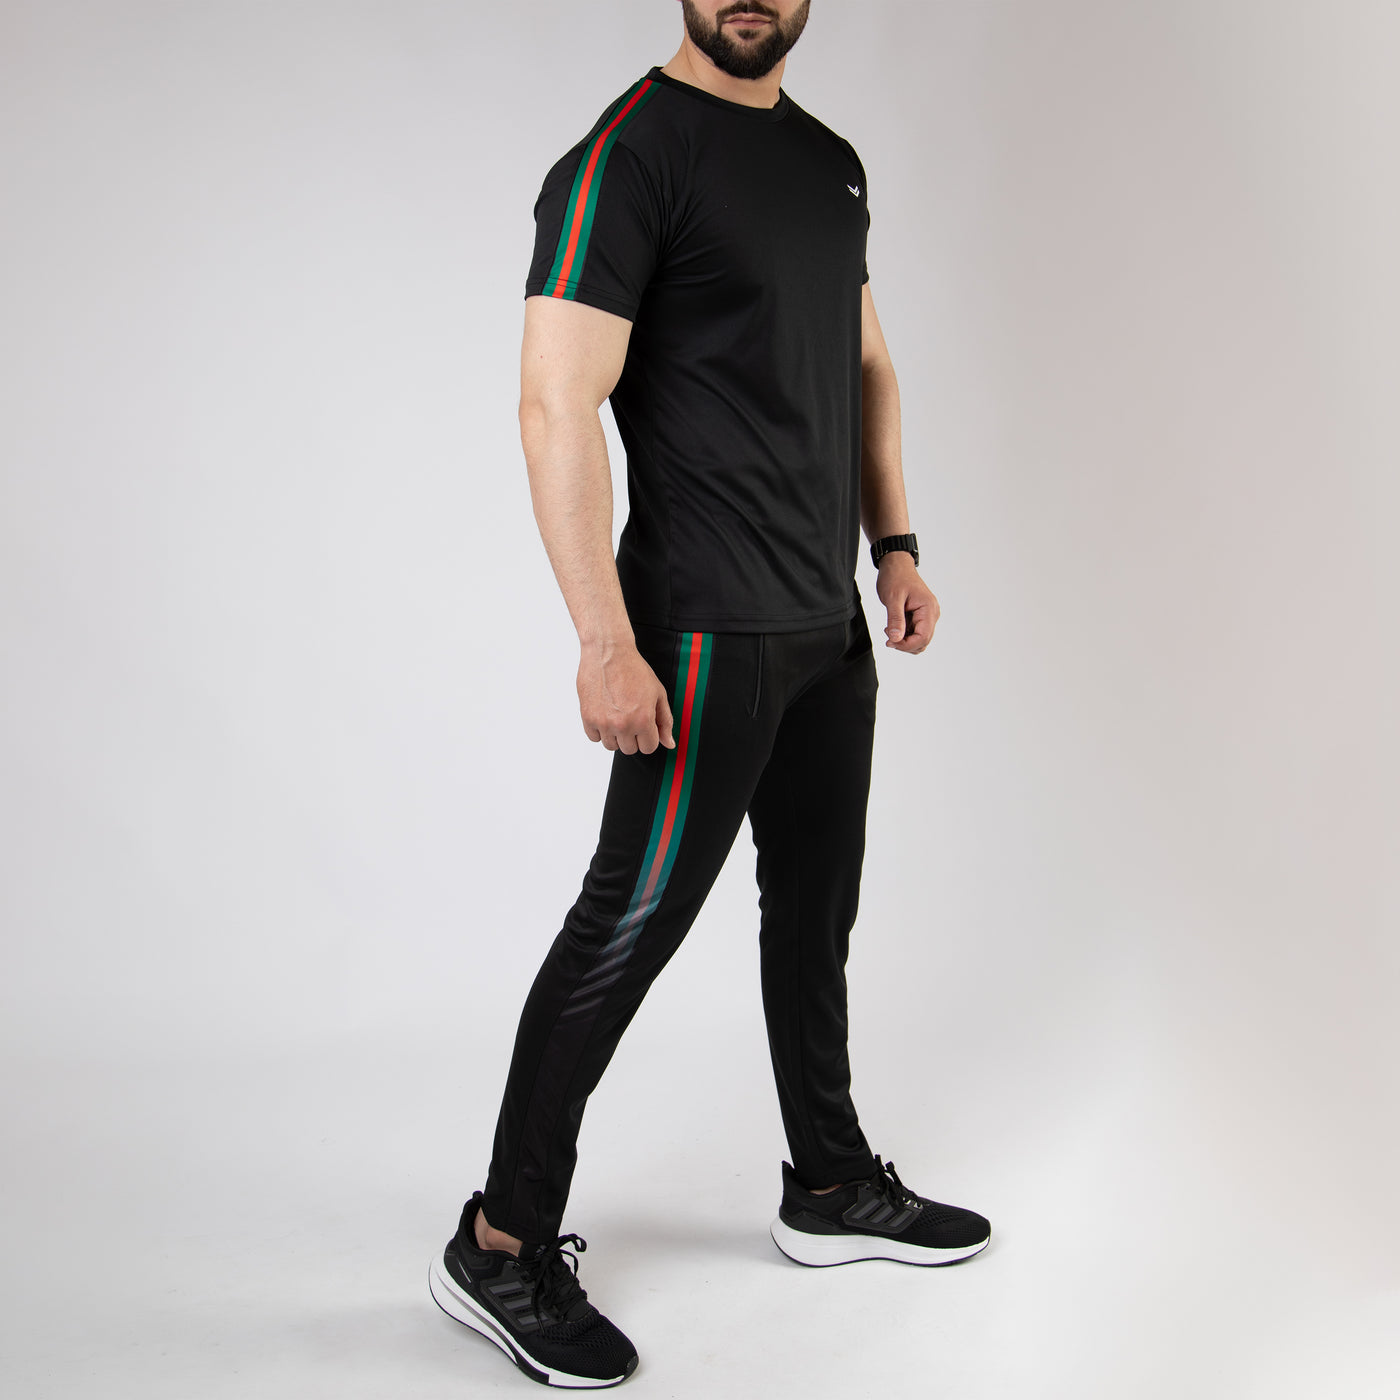 Black Twinset with Green & Red Panels on Sleeves